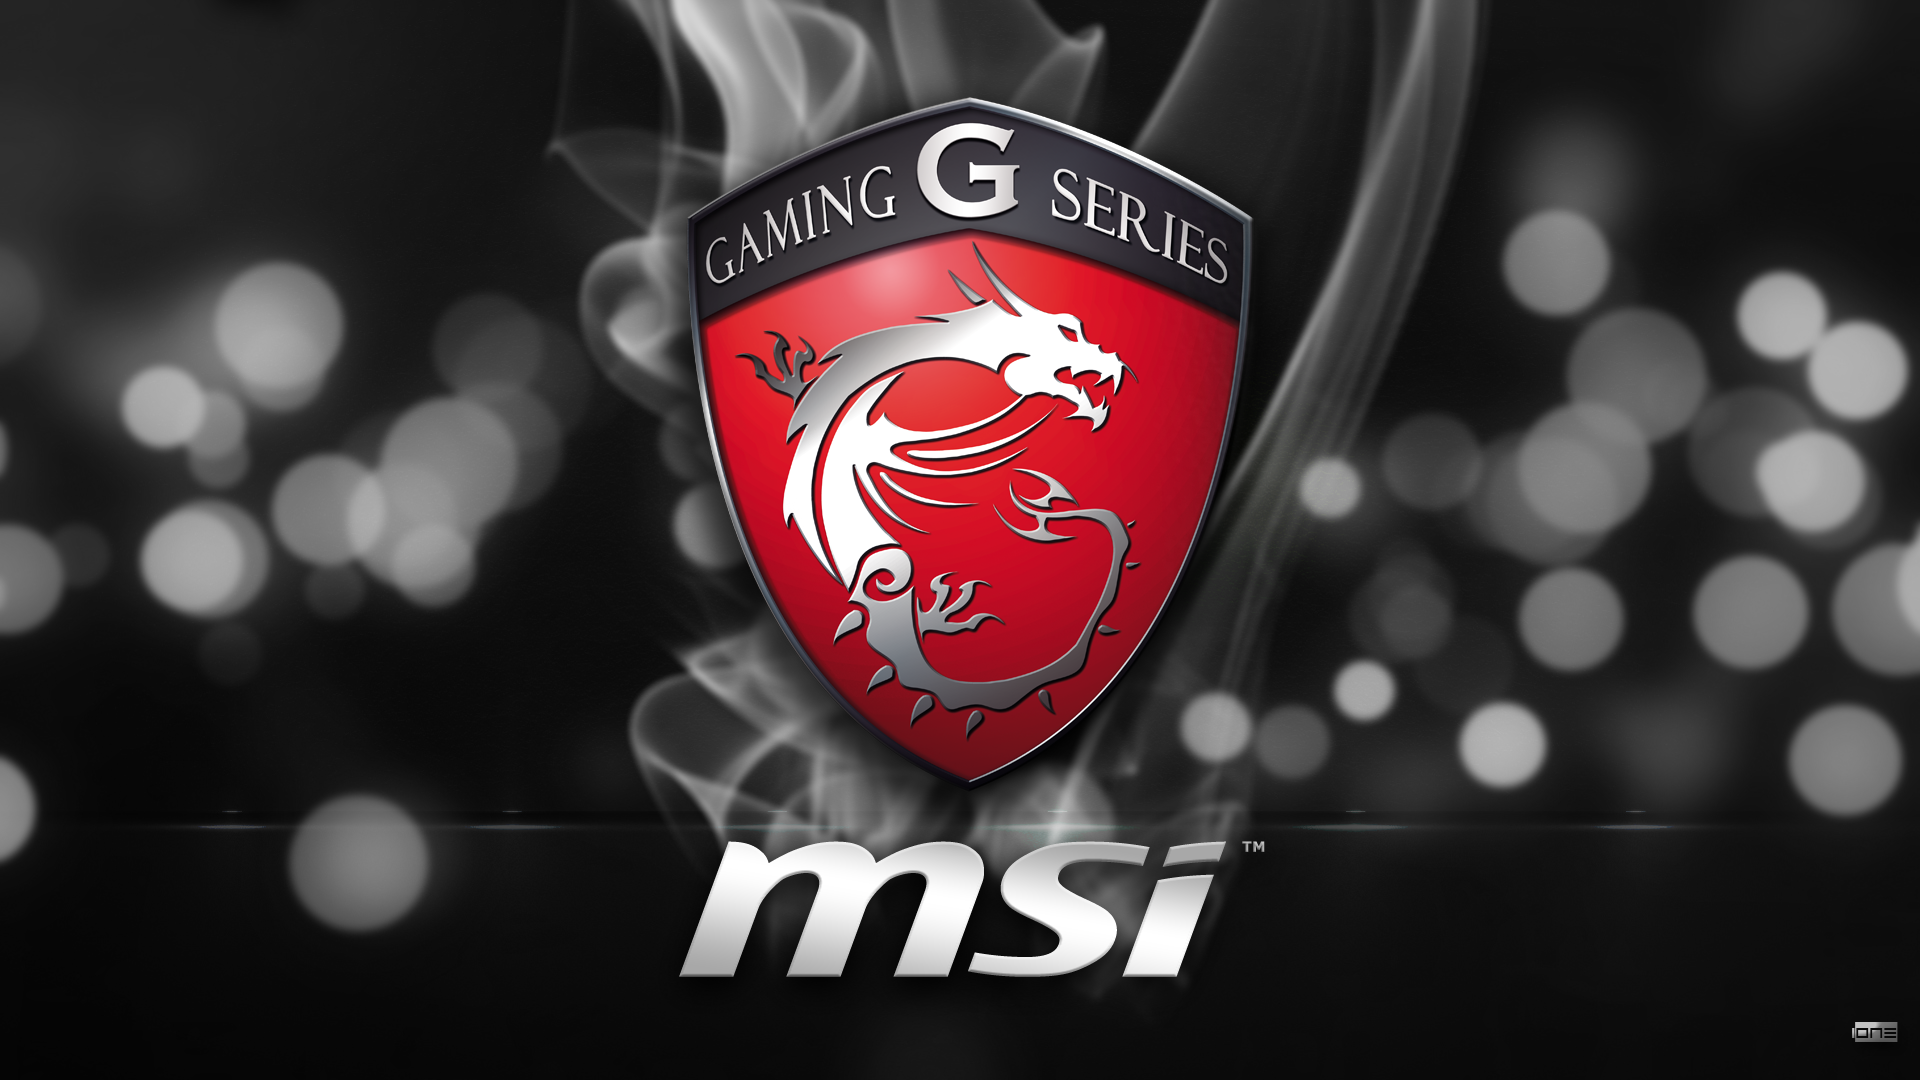 The Latest G series Wallpaper 1920x1080